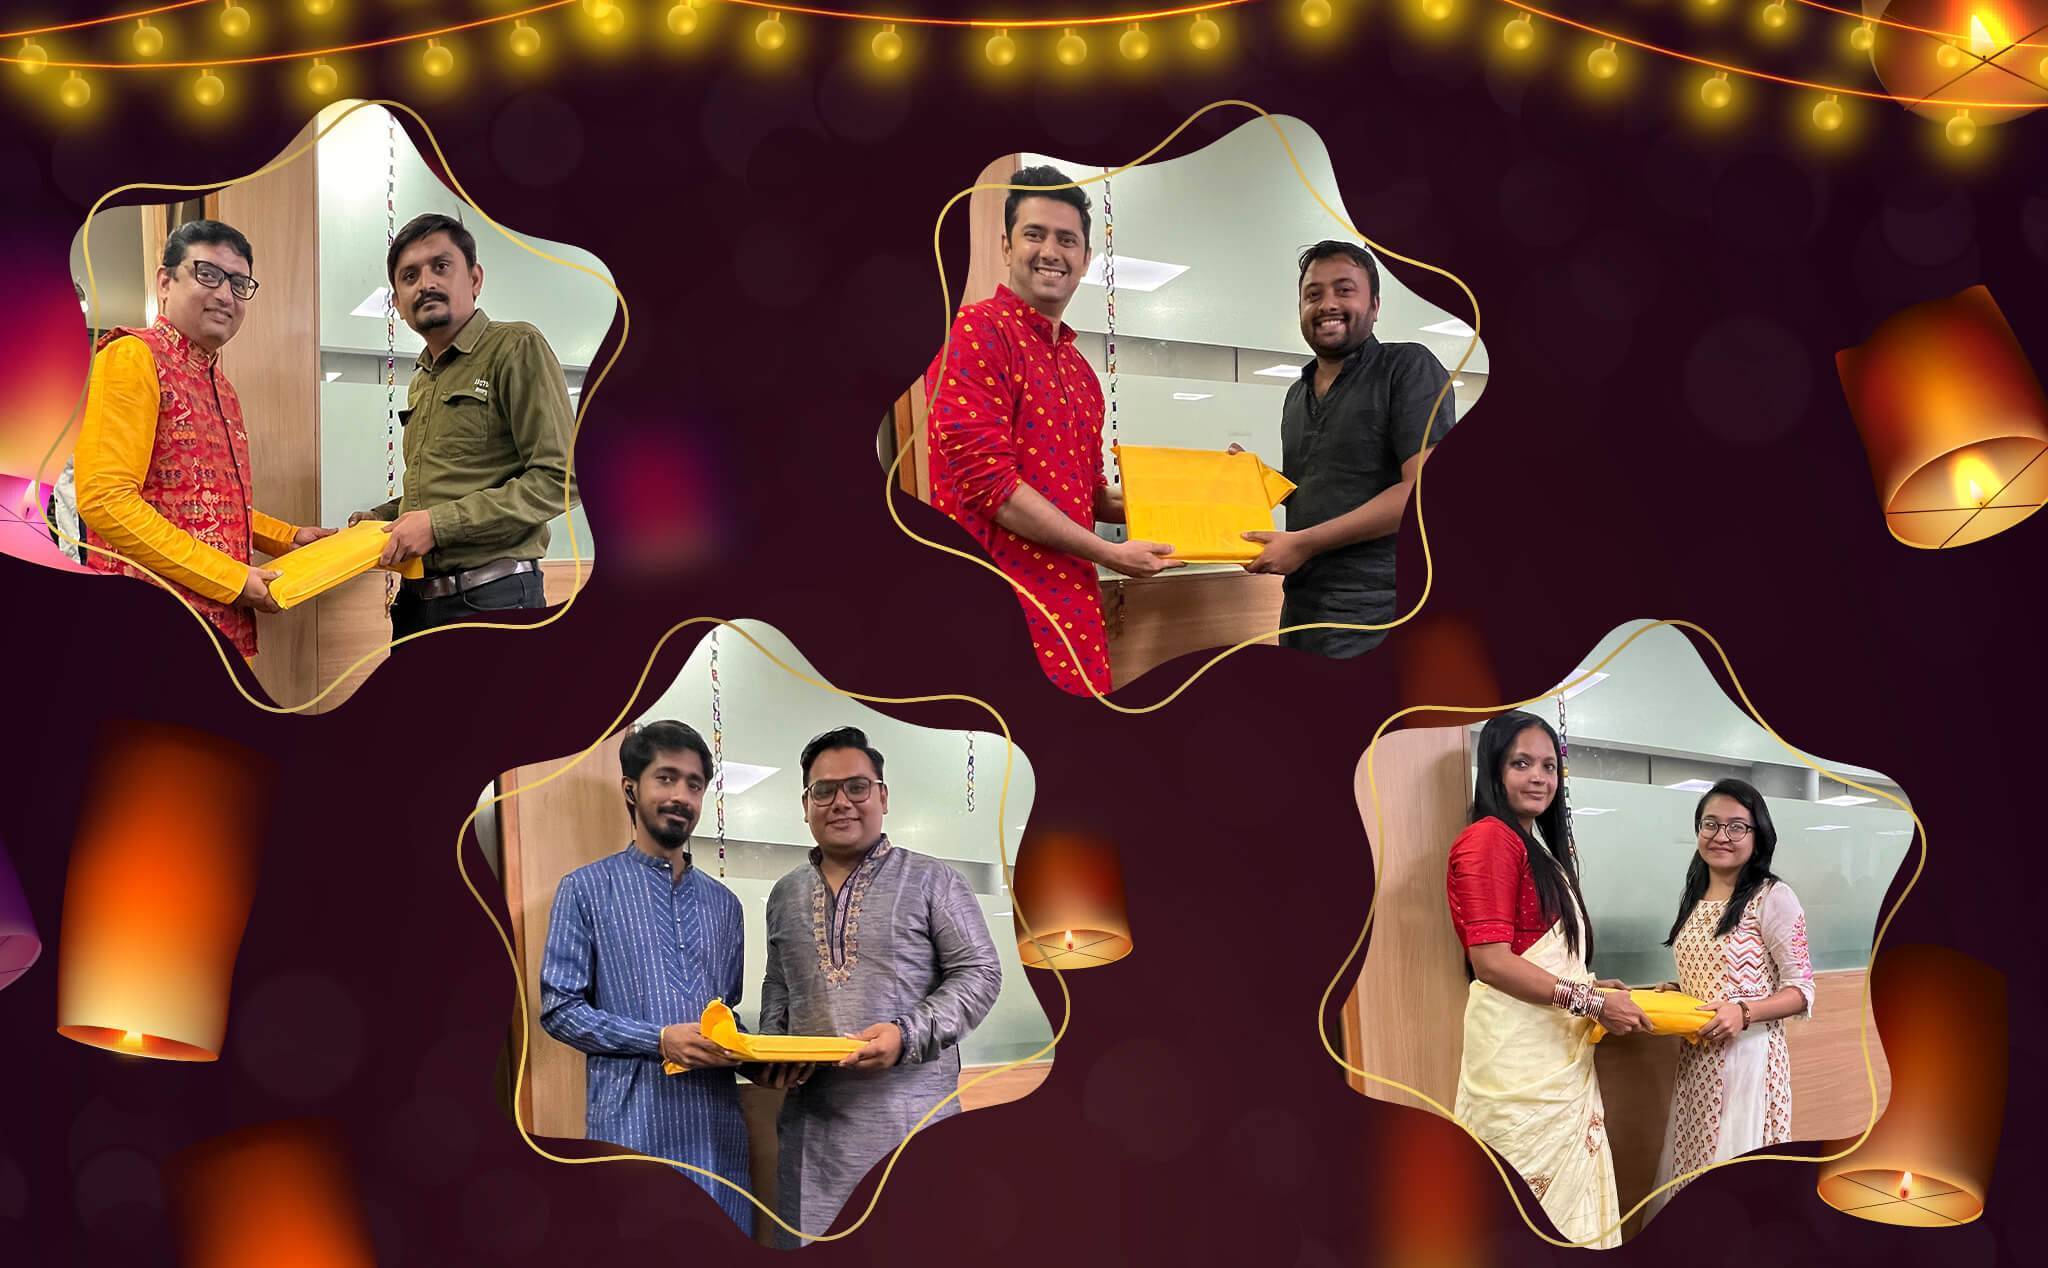 Silicon IT Hub company celebrated Diwali with a spectacular event, illuminating the workplace with joy, and fostering a spirit of togetherness among employees.